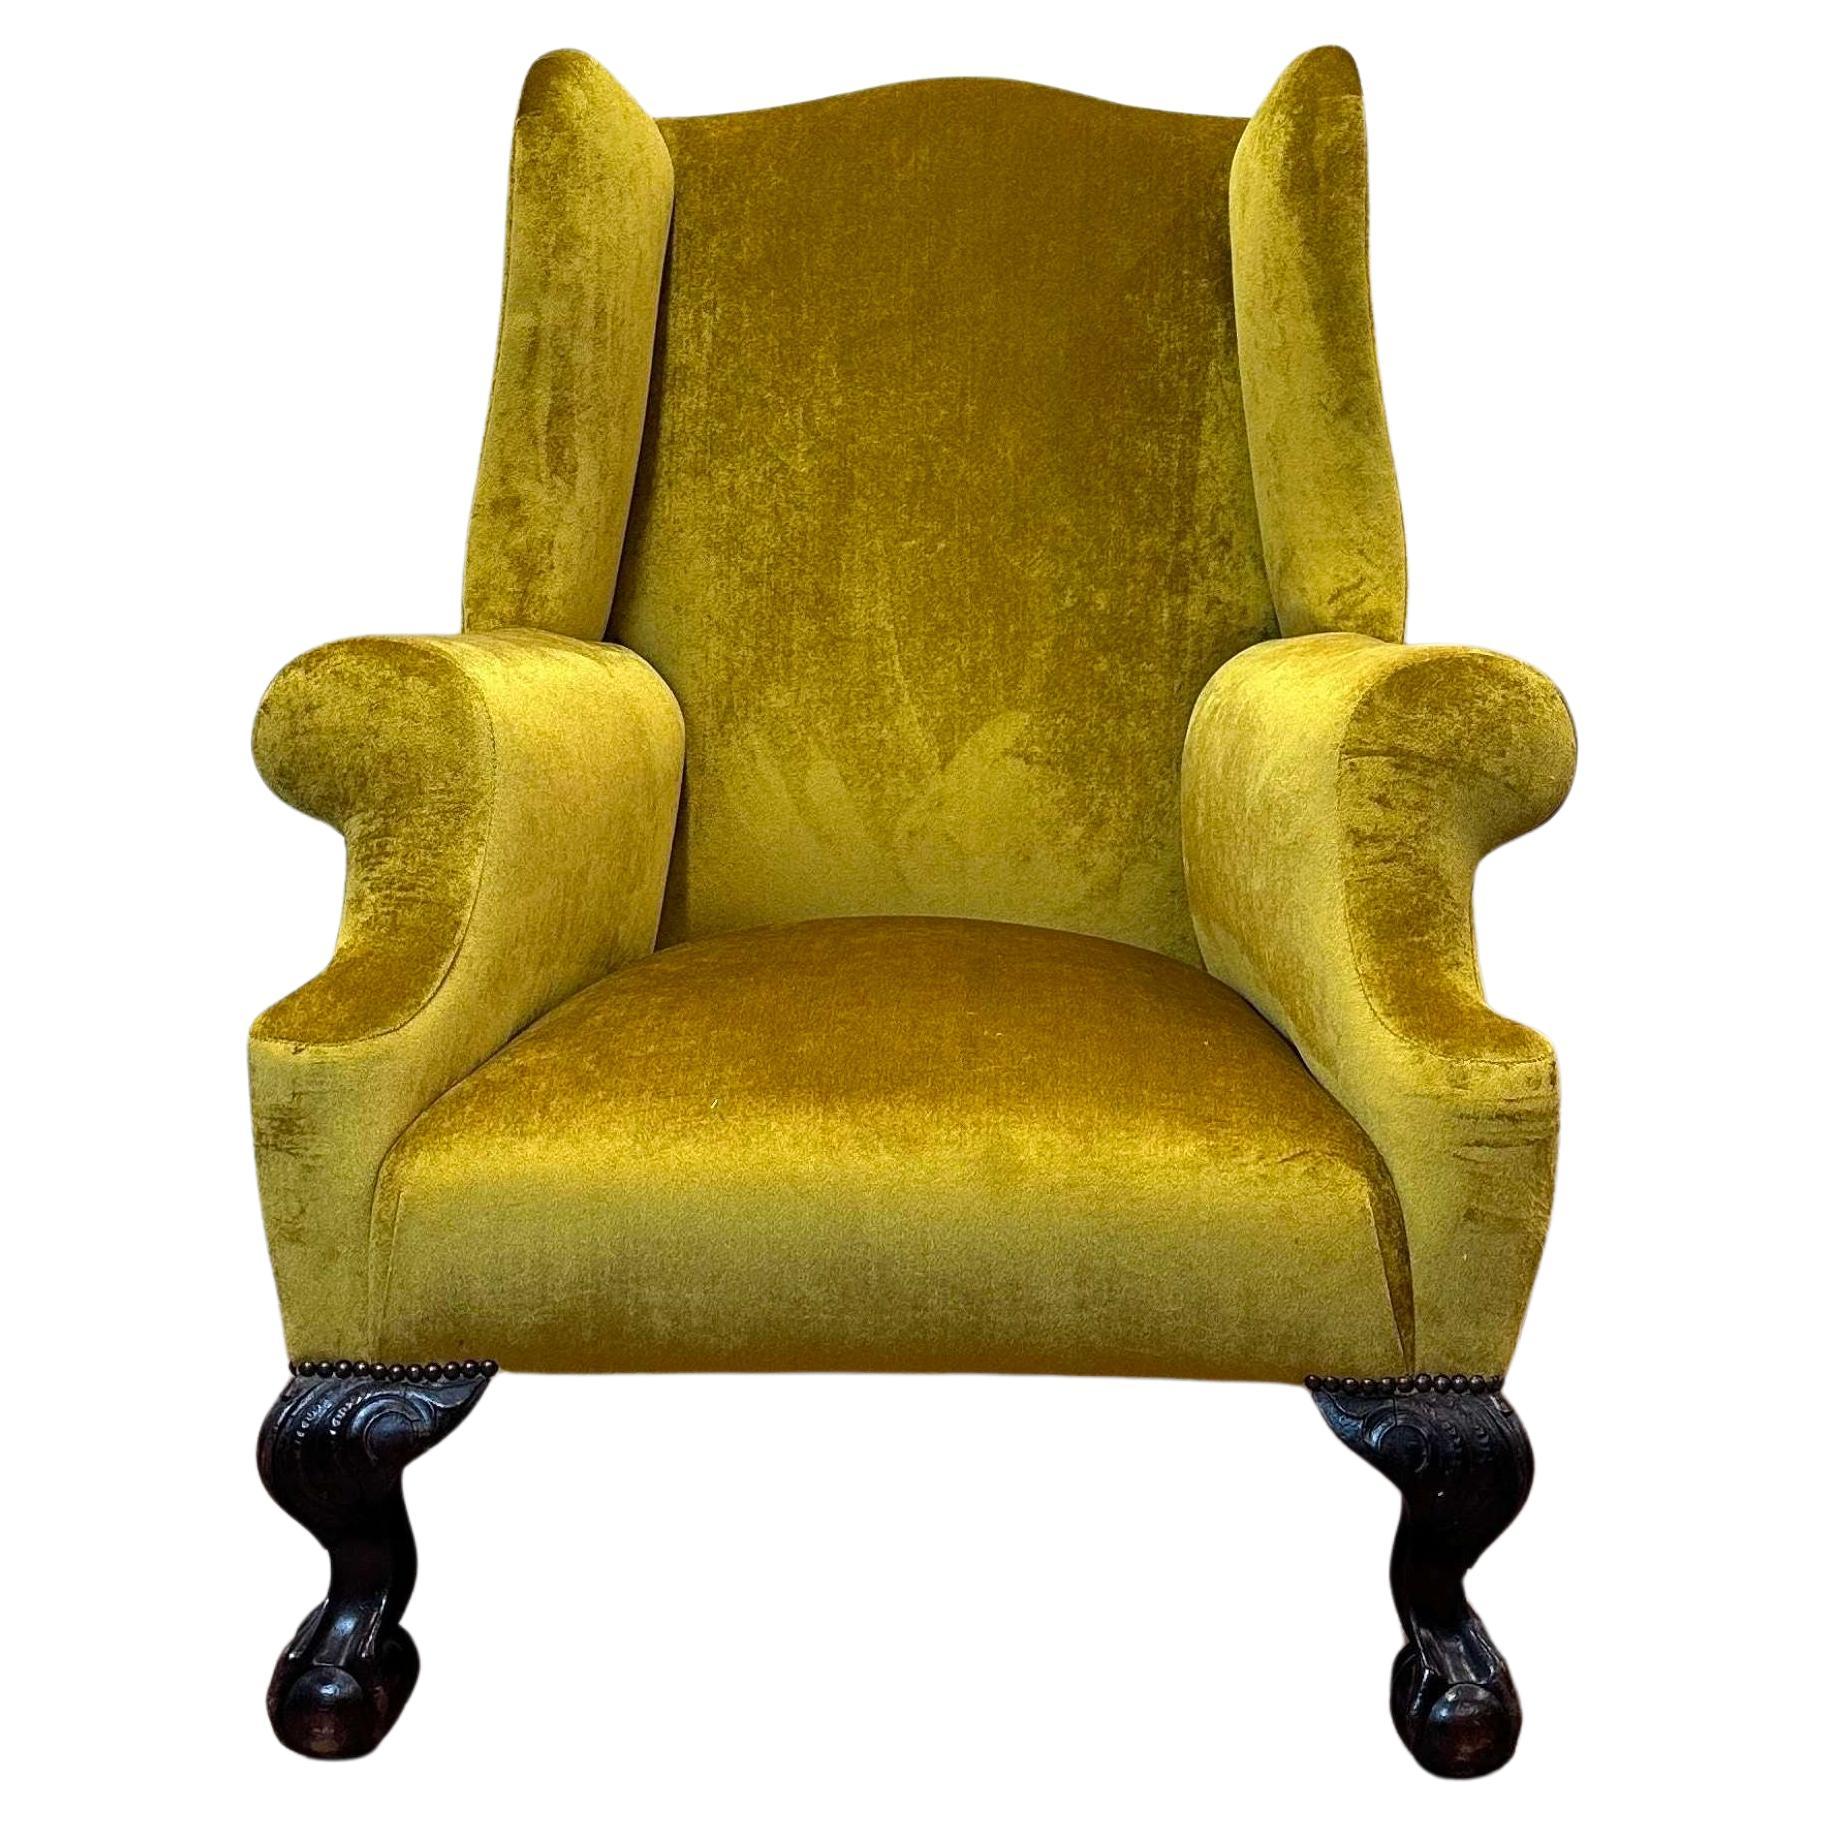 Large 19th Century English Wingback Armchair Reupholstered